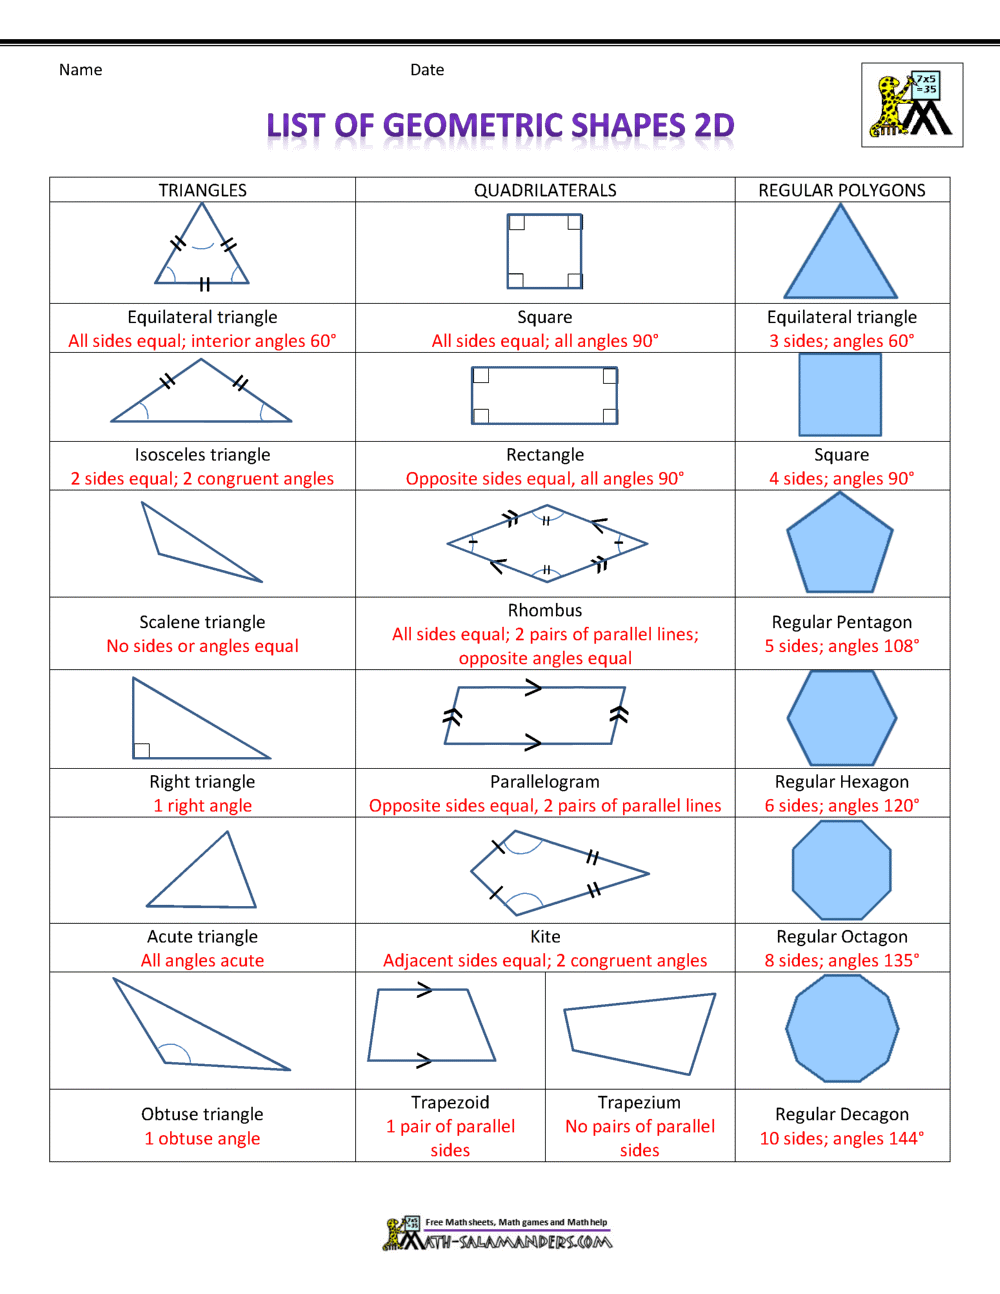 Bond Shapes And Angles Chart